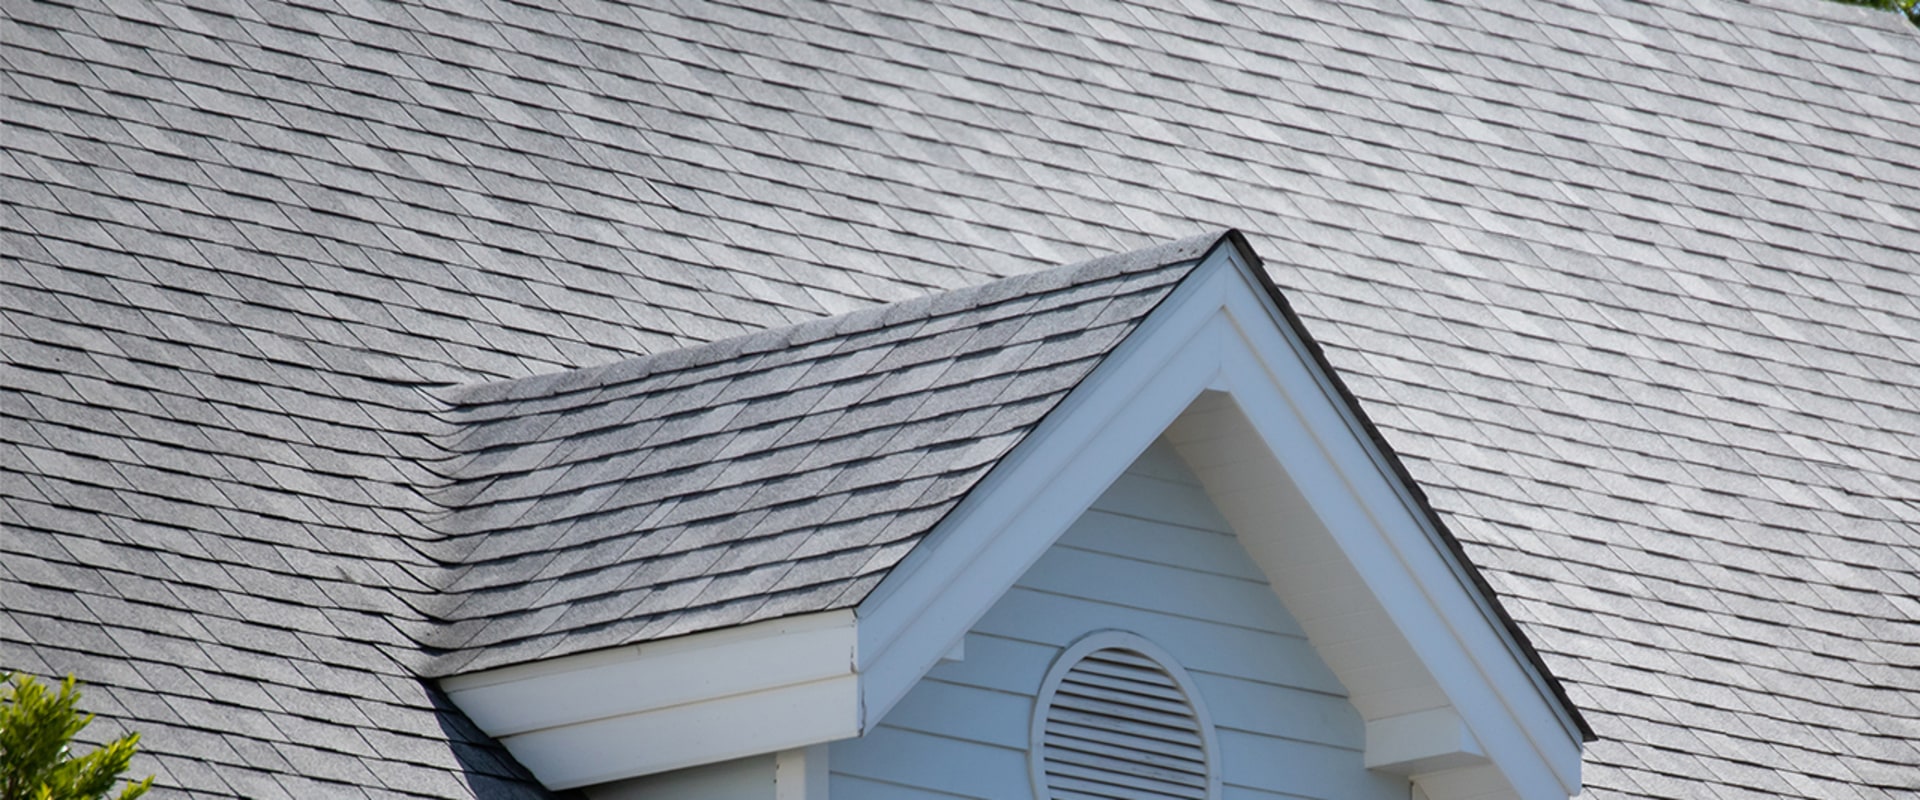 What should a new roof include?